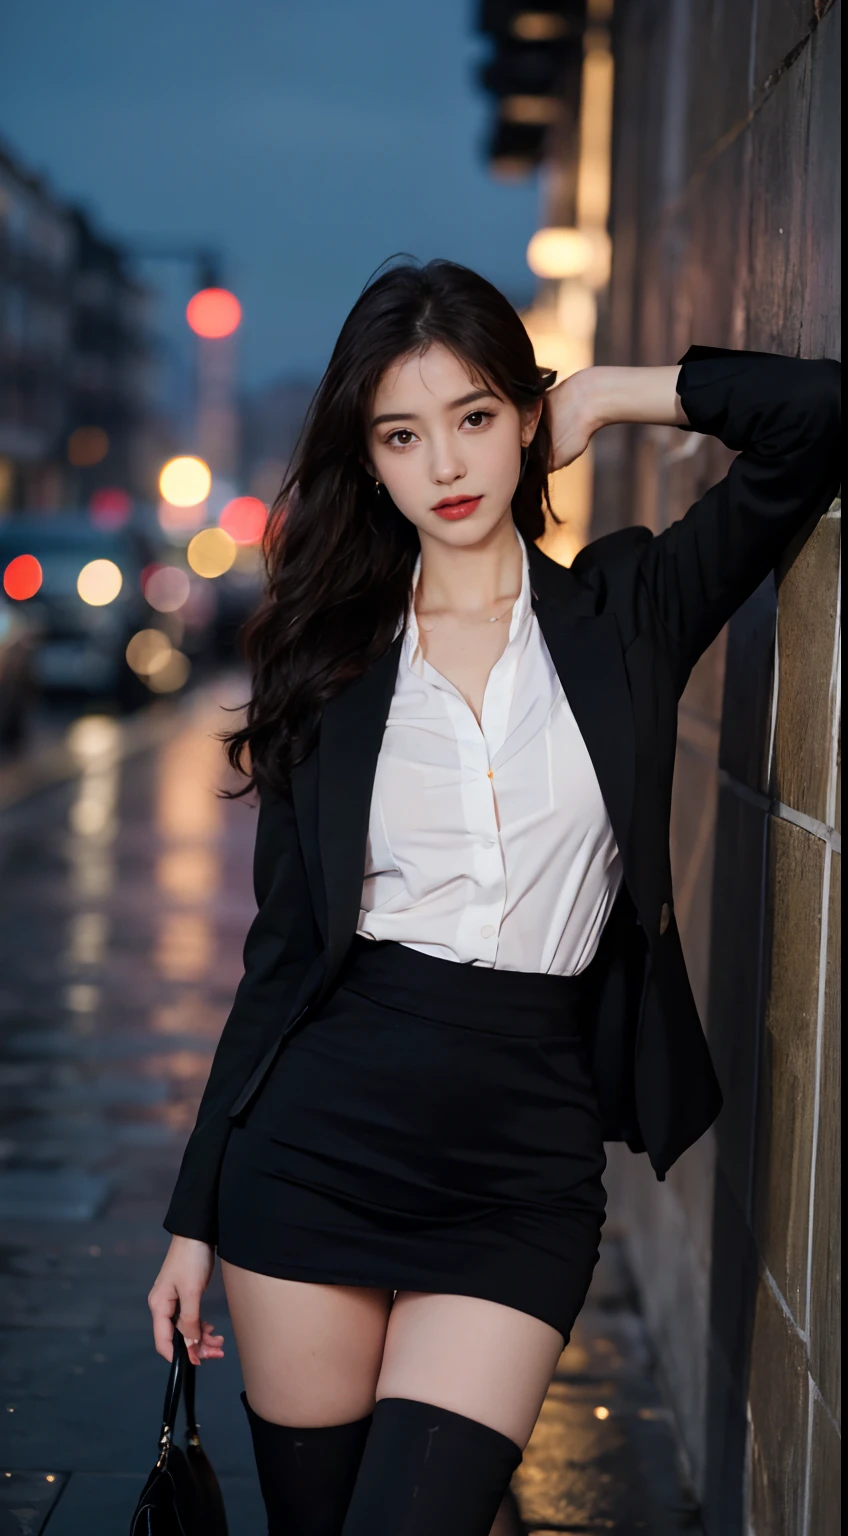 ((Realistic lighting, Best Quality, 8K, Masterpiece: 1.3)), Focus: 1.2, 1girl, Perfect Beauty: 1.4, Slim Abs: 1.1, (Big Breasts), (White Shirt: 1.4), (Outdoor, Night: 1.1), City Street, Super Fine Face, Fine Eyes, Double Eyelids, (Over the Knee Black Stockings: 1.5), (Wet in the Rain, Wet: 1.2)